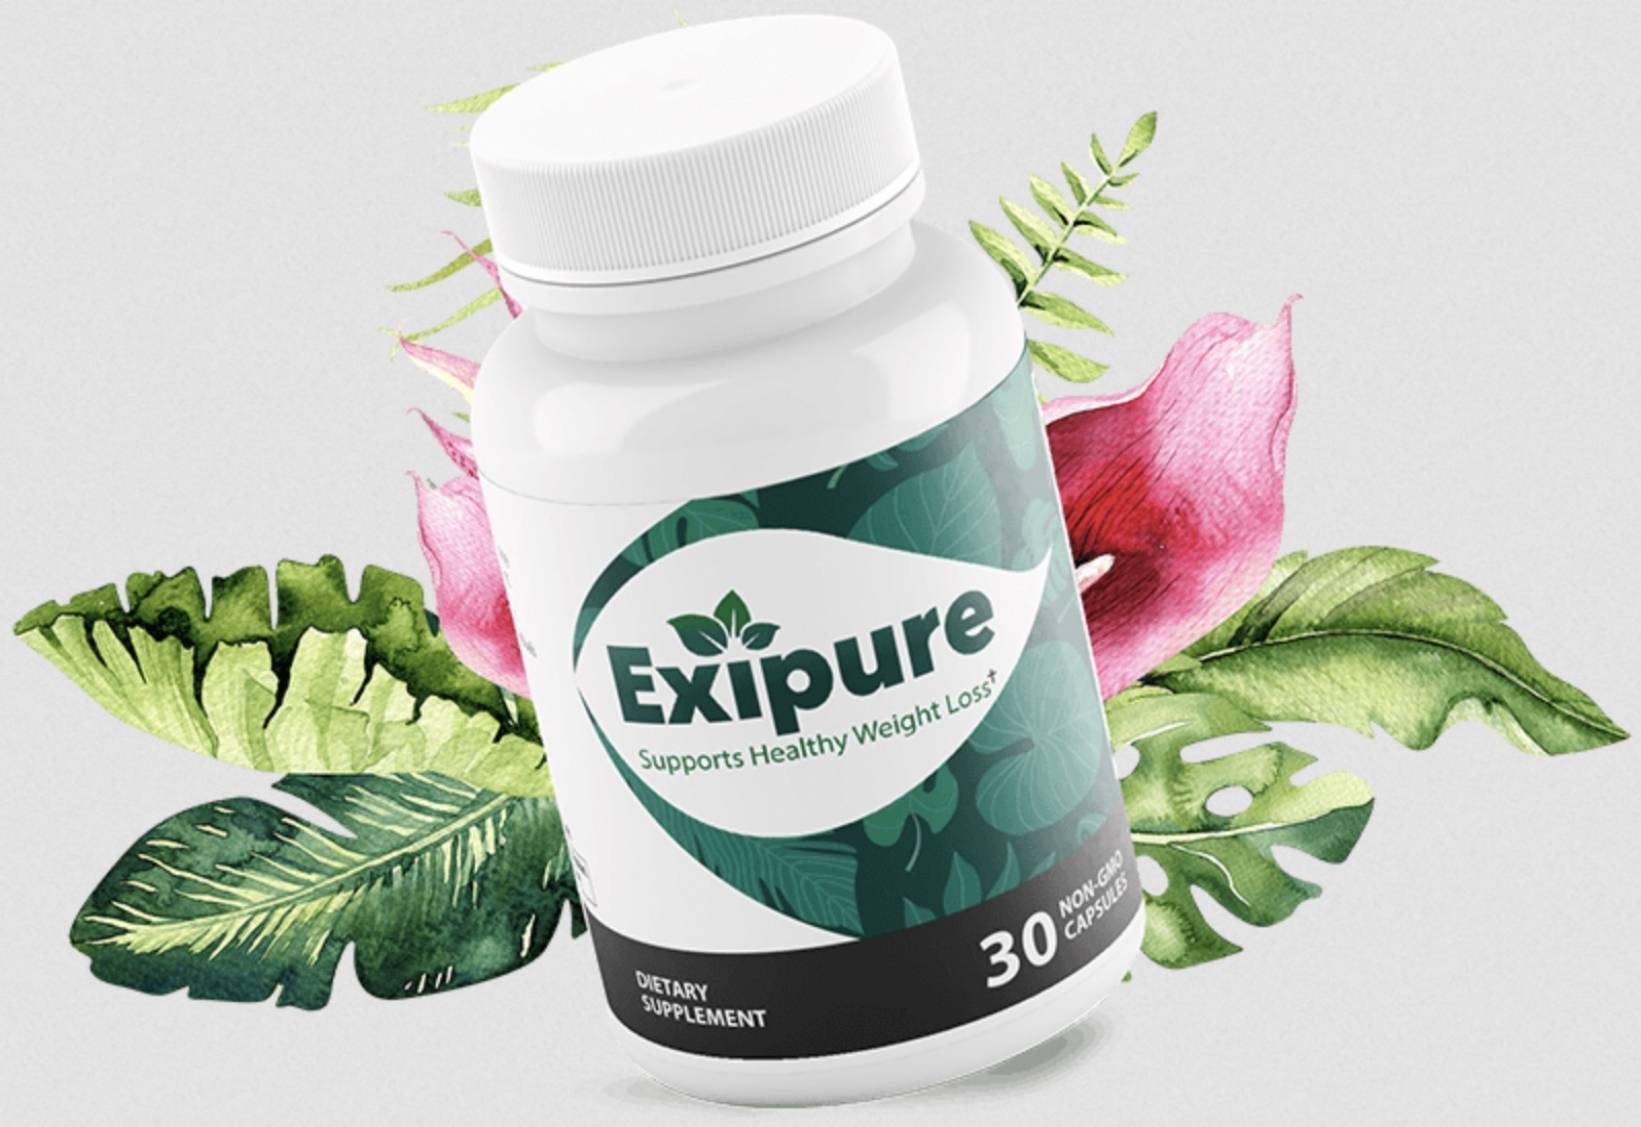 Is Exipure Any Good